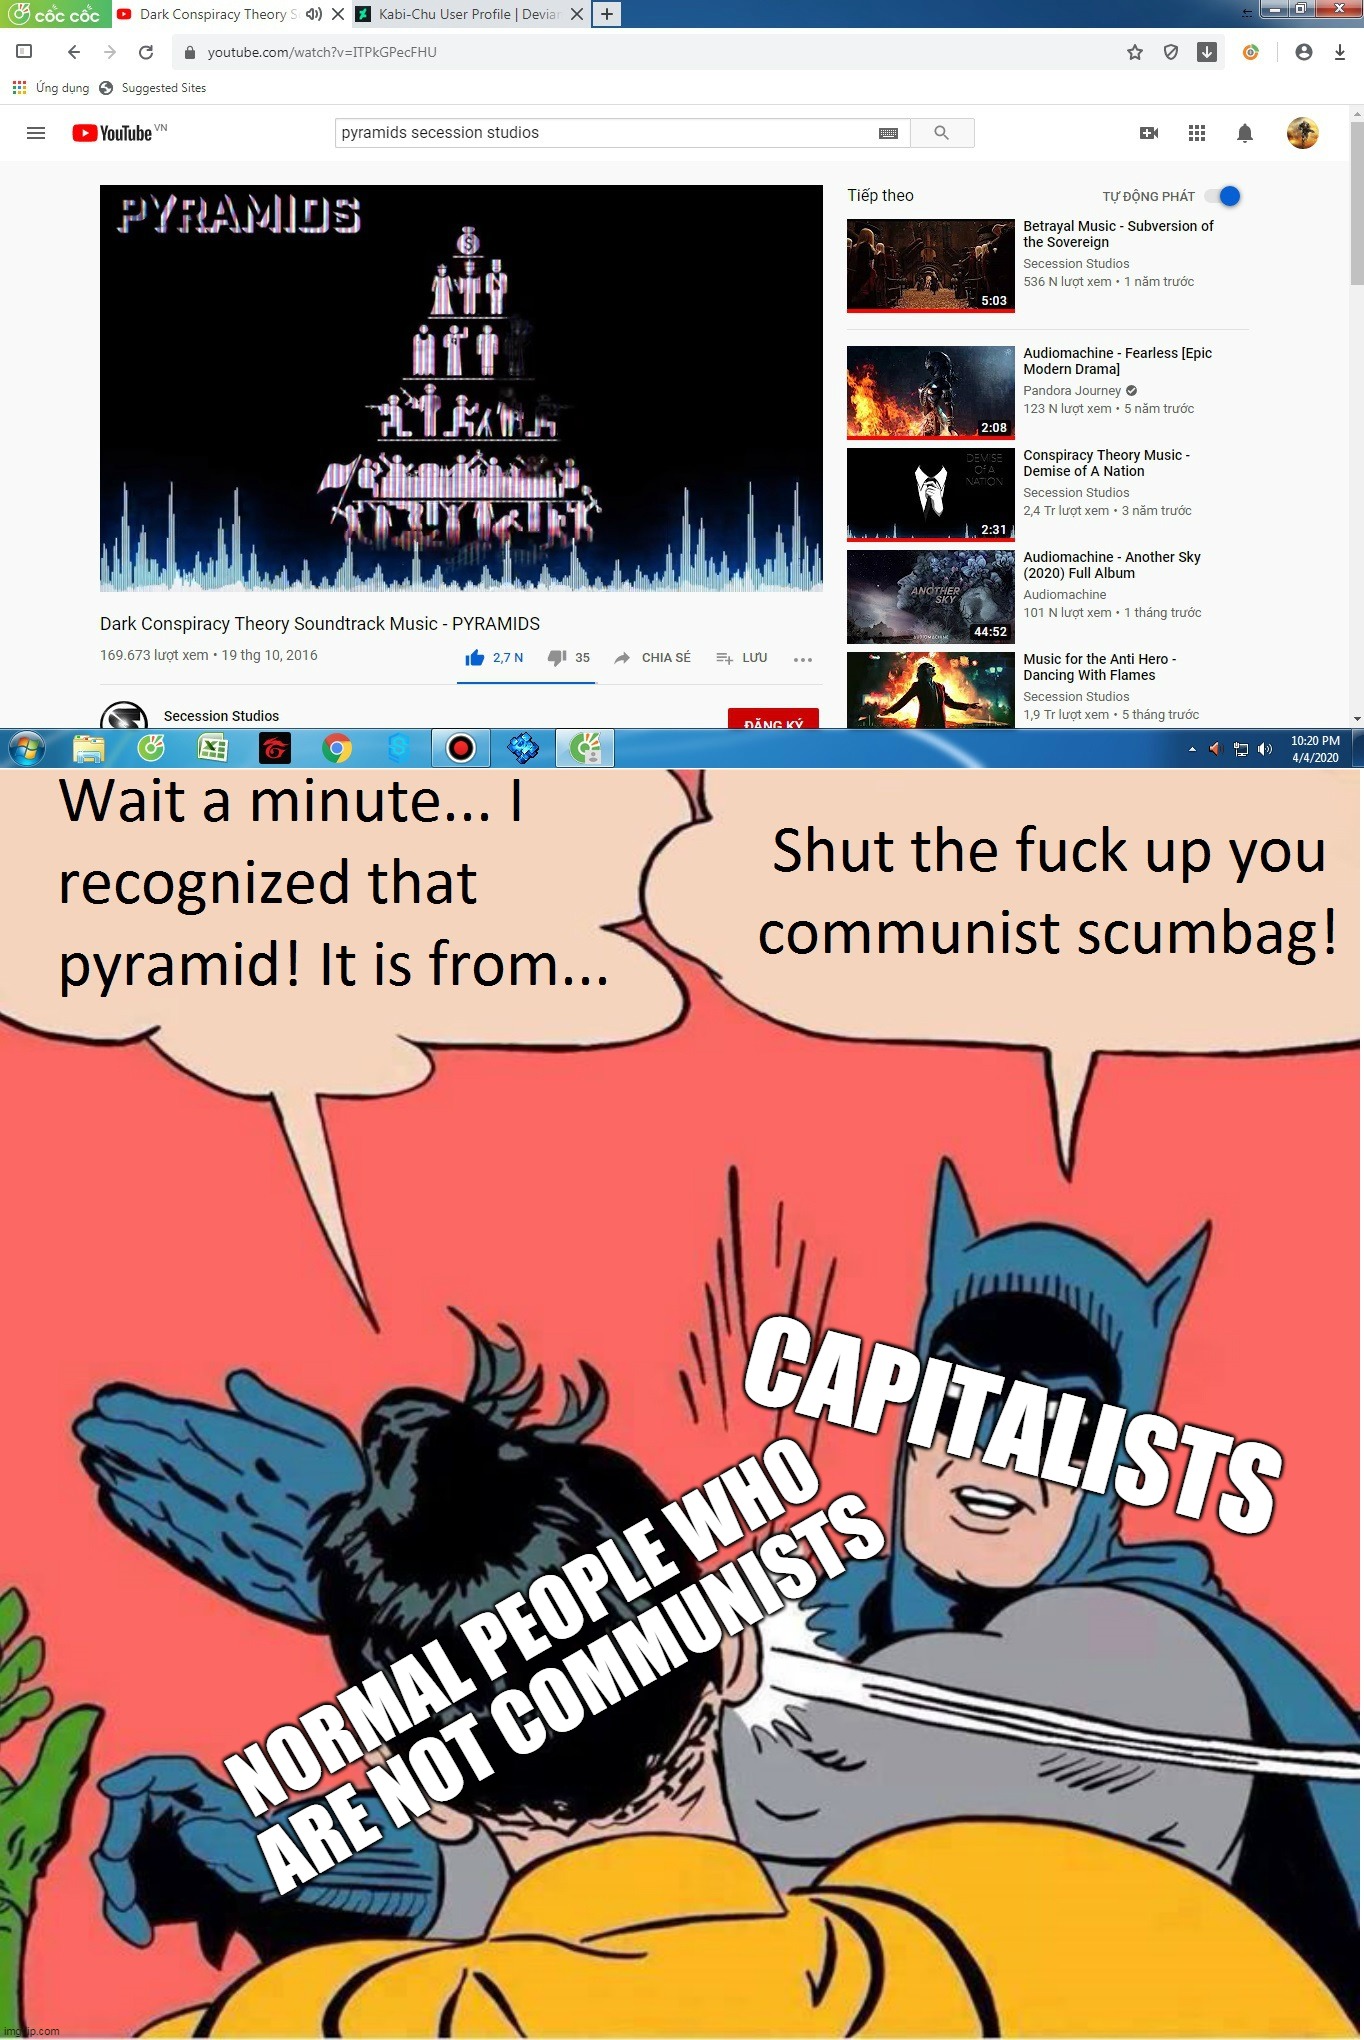 Batman Slaps Robin Meme #2 | CAPITALISTS; NORMAL PEOPLE WHO 
ARE NOT COMMUNISTS | image tagged in memes,batman slapping robin,communism,capitalism,pyramid,screenshot | made w/ Imgflip meme maker